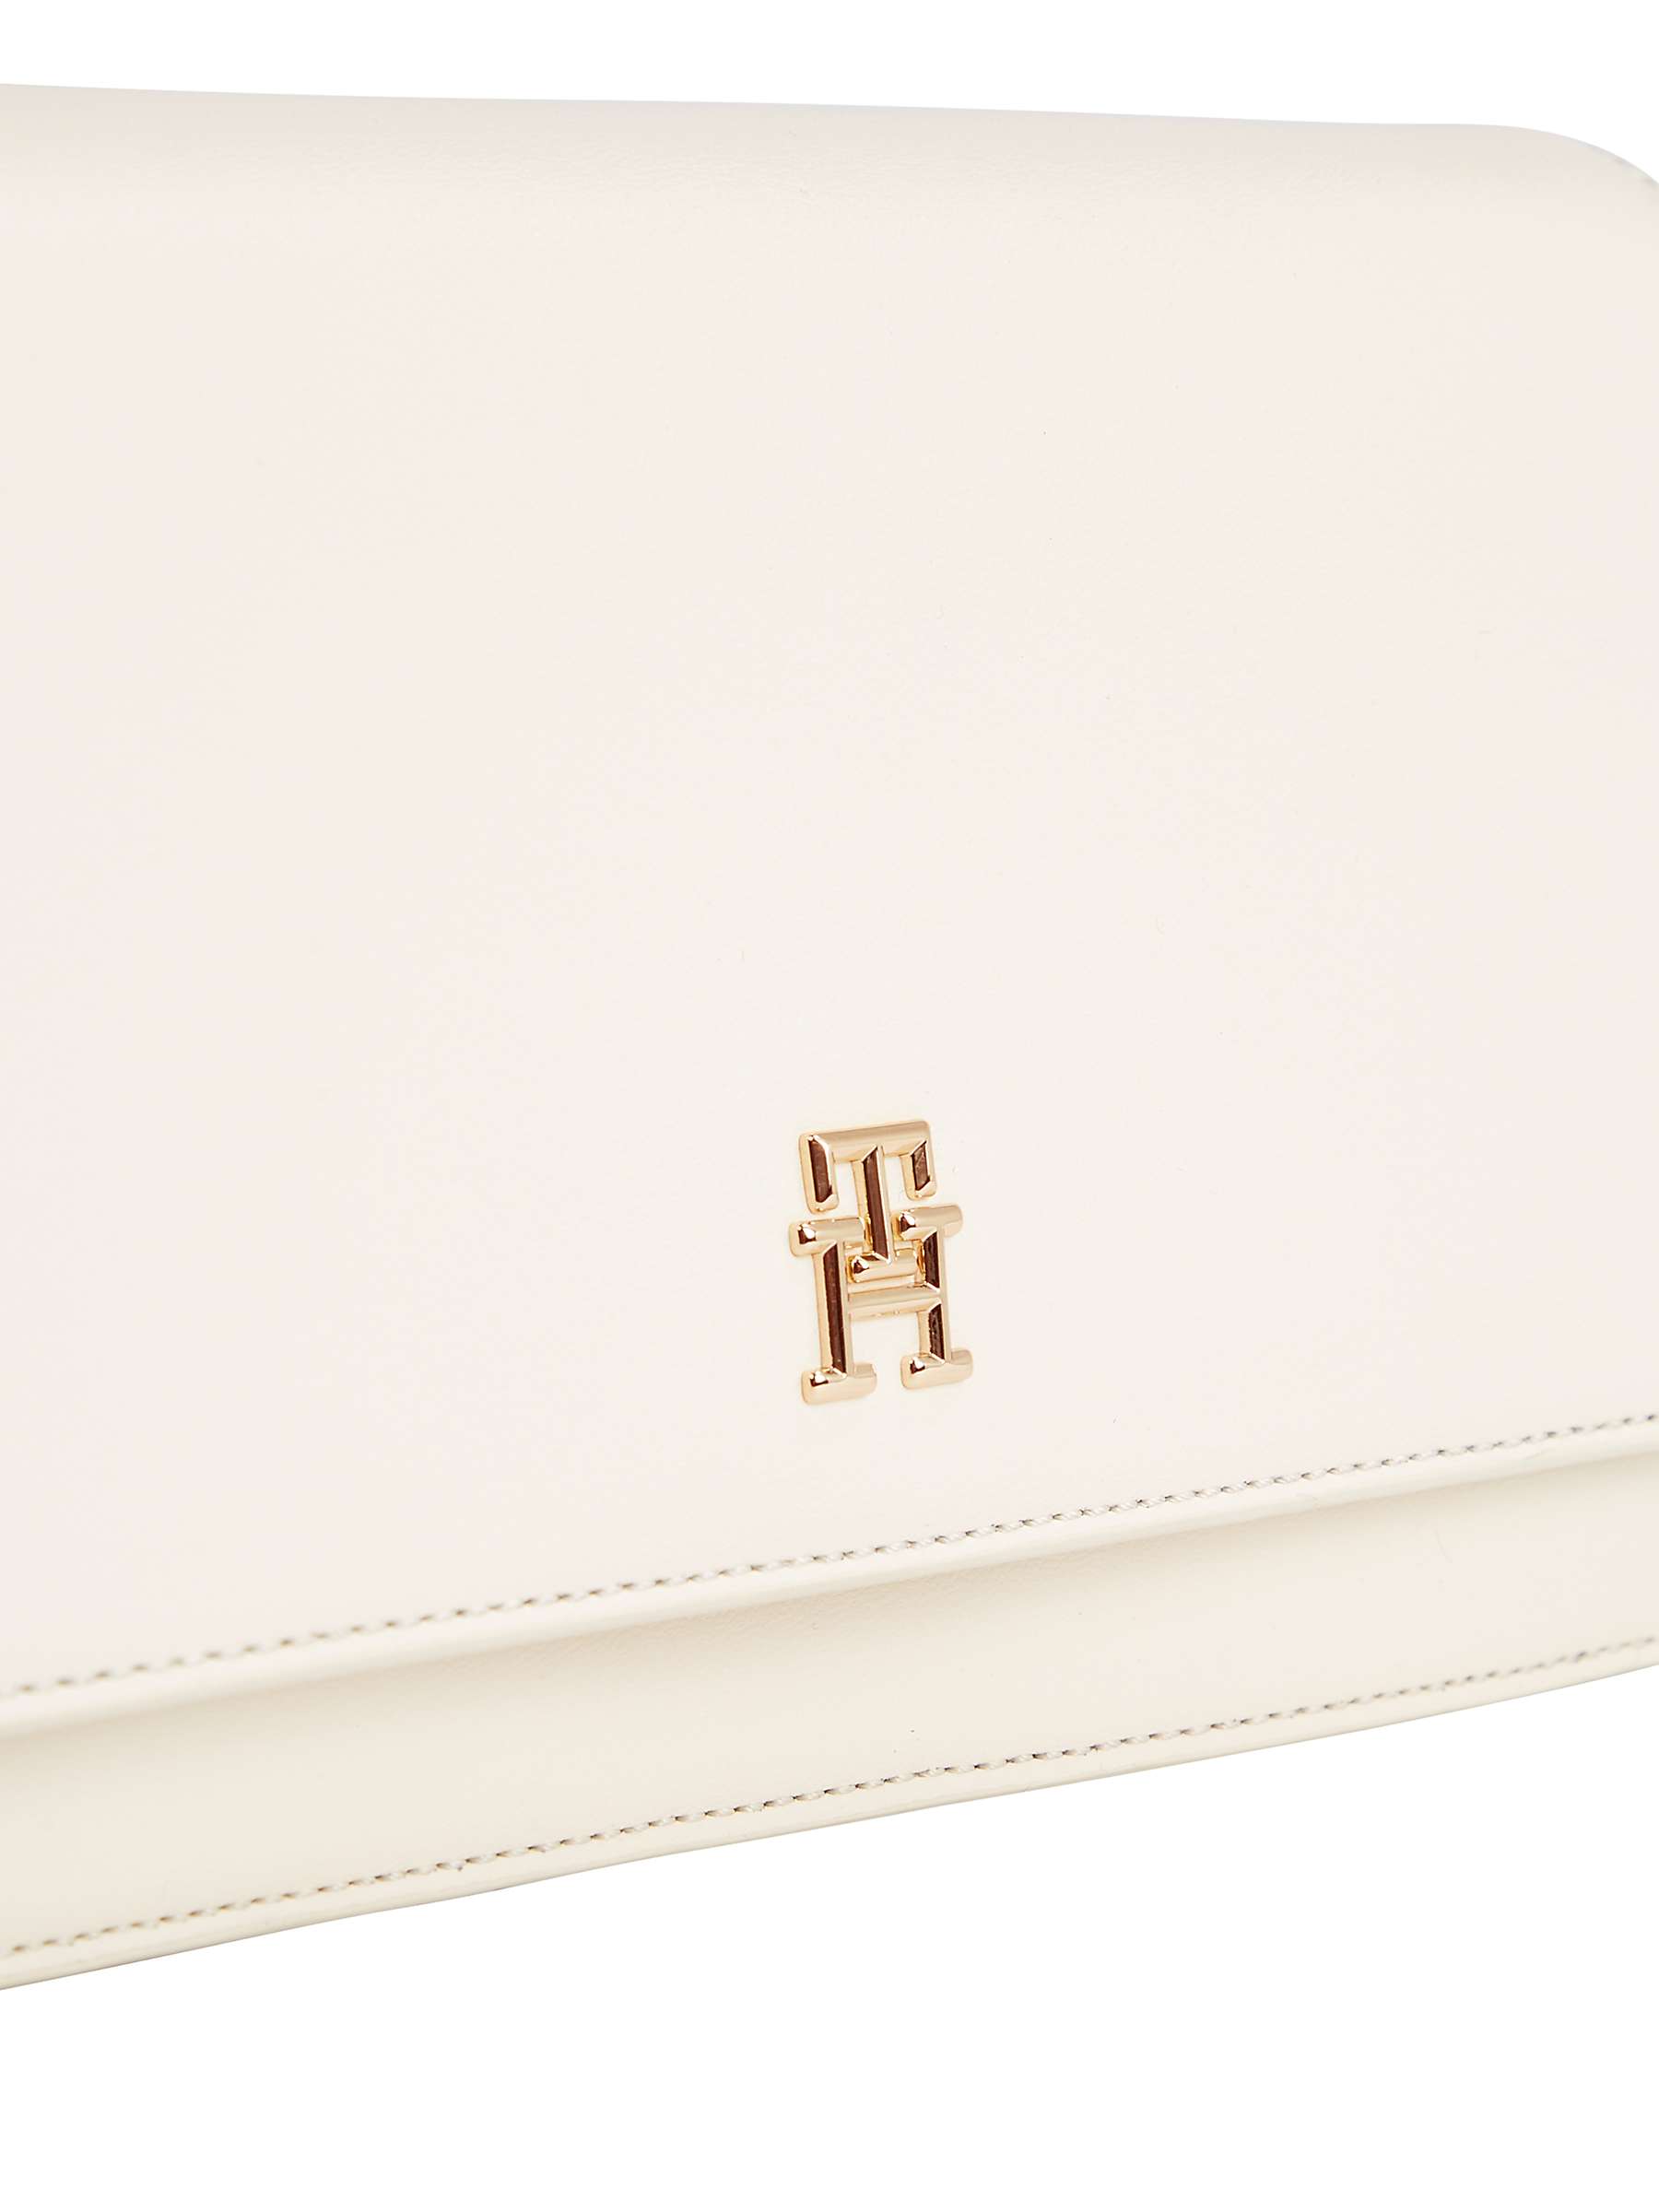 Buy Tommy Hilfiger Chain Strap Small Crossbody Bag, Calico Online at johnlewis.com